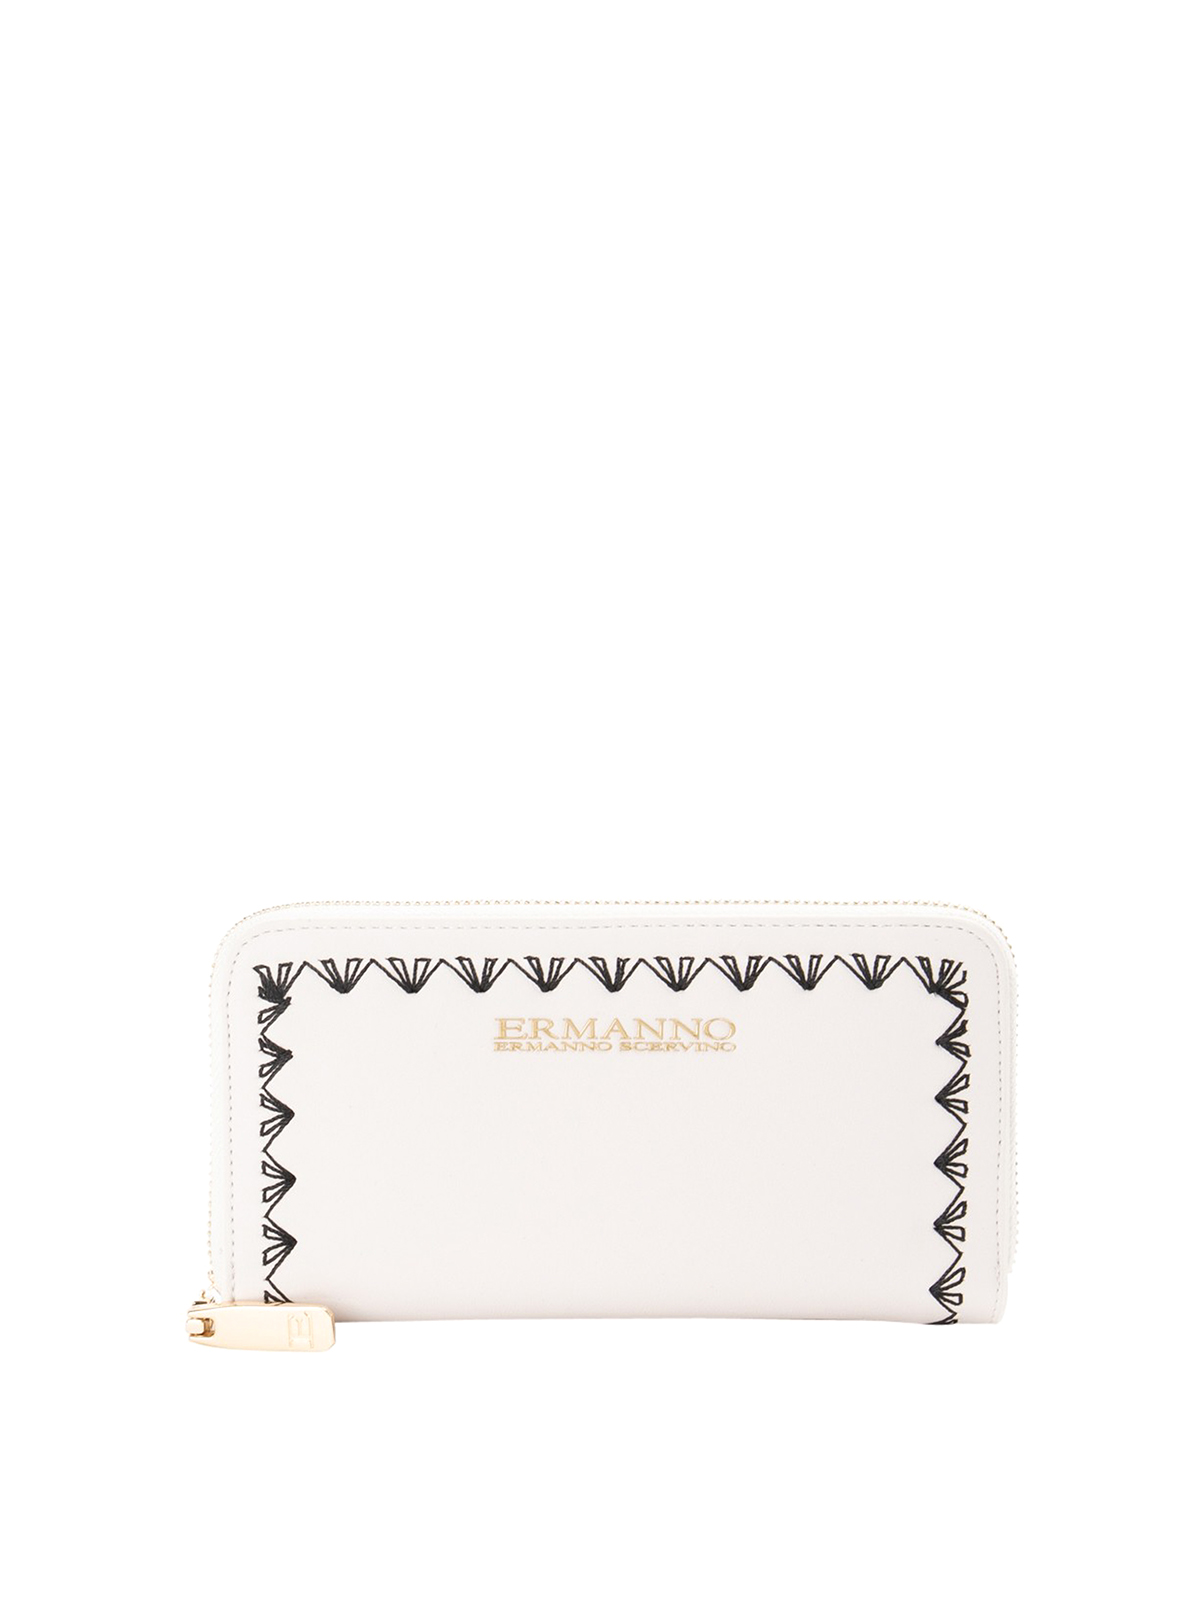 Ermanno By Ermanno Scervino Wallet In White